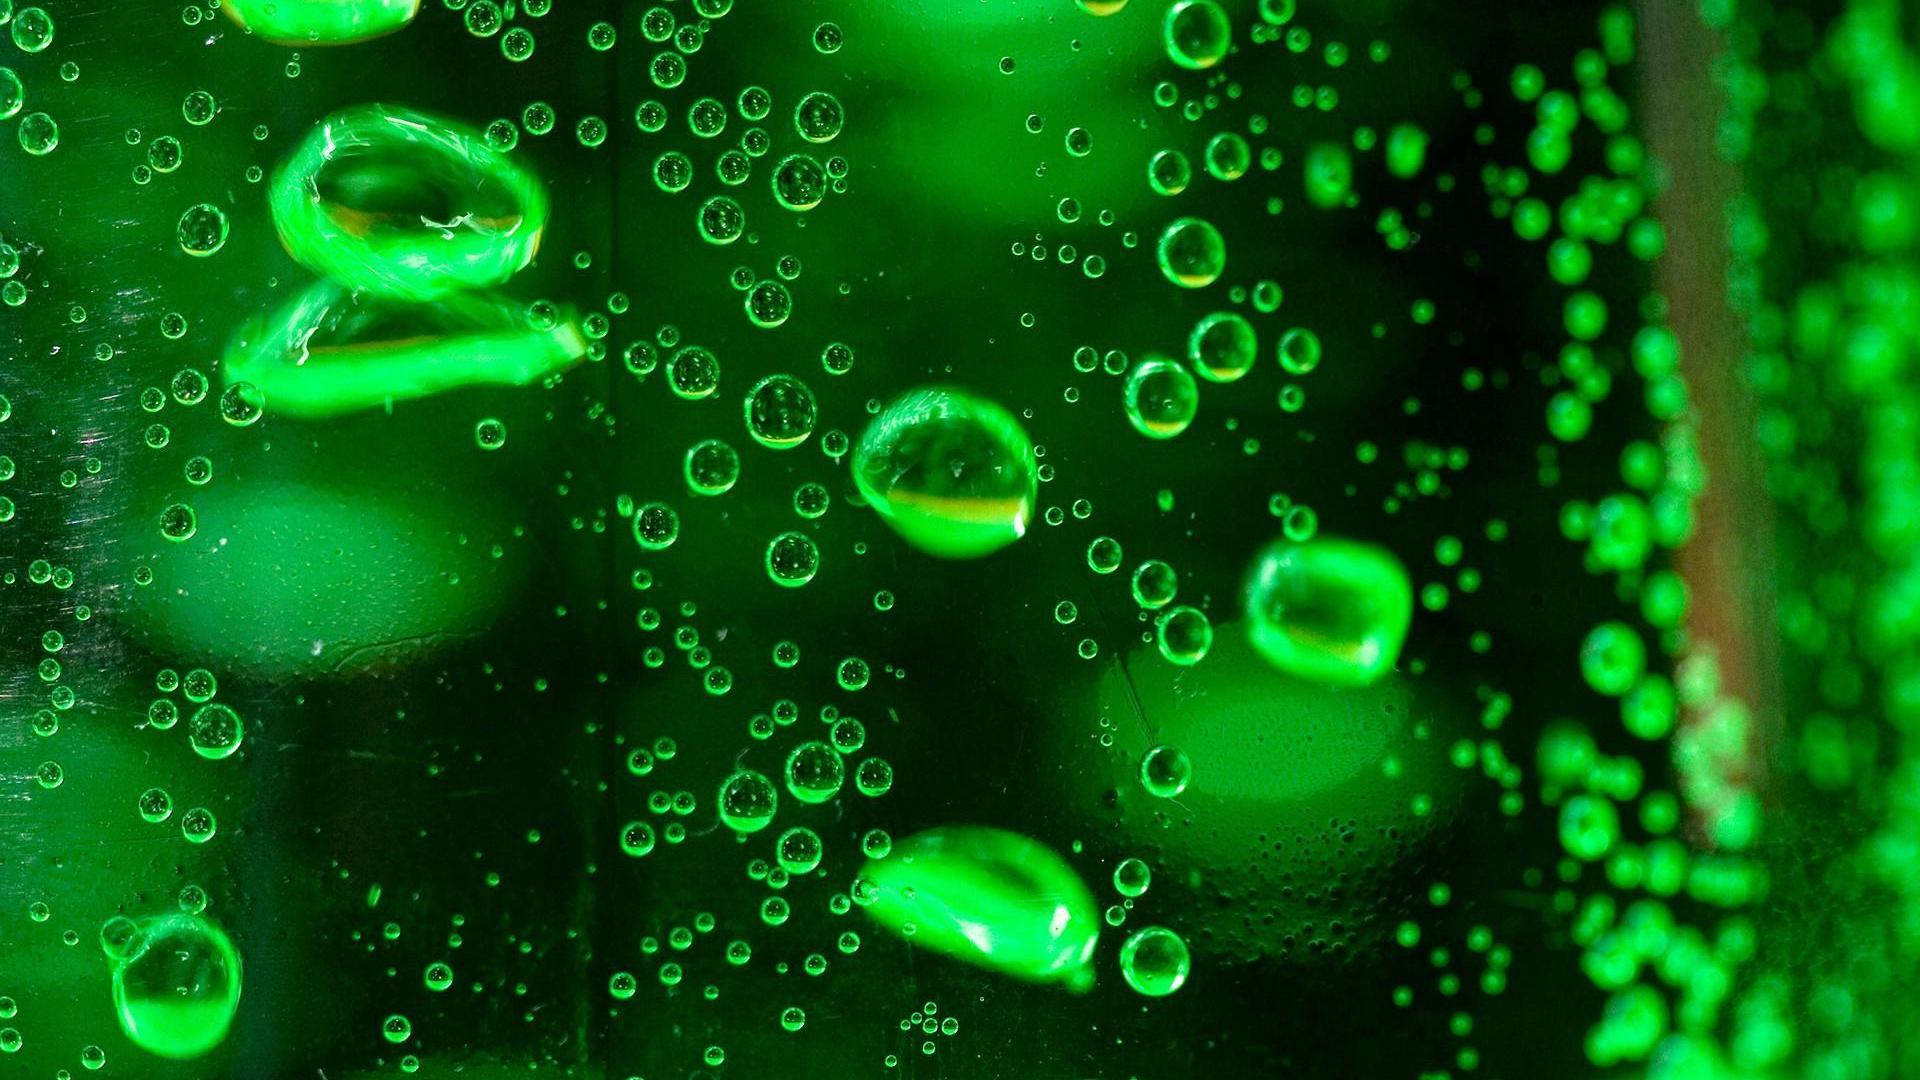 air bubbles in water abstract hd wallpaper | Free hd wallpapers ...